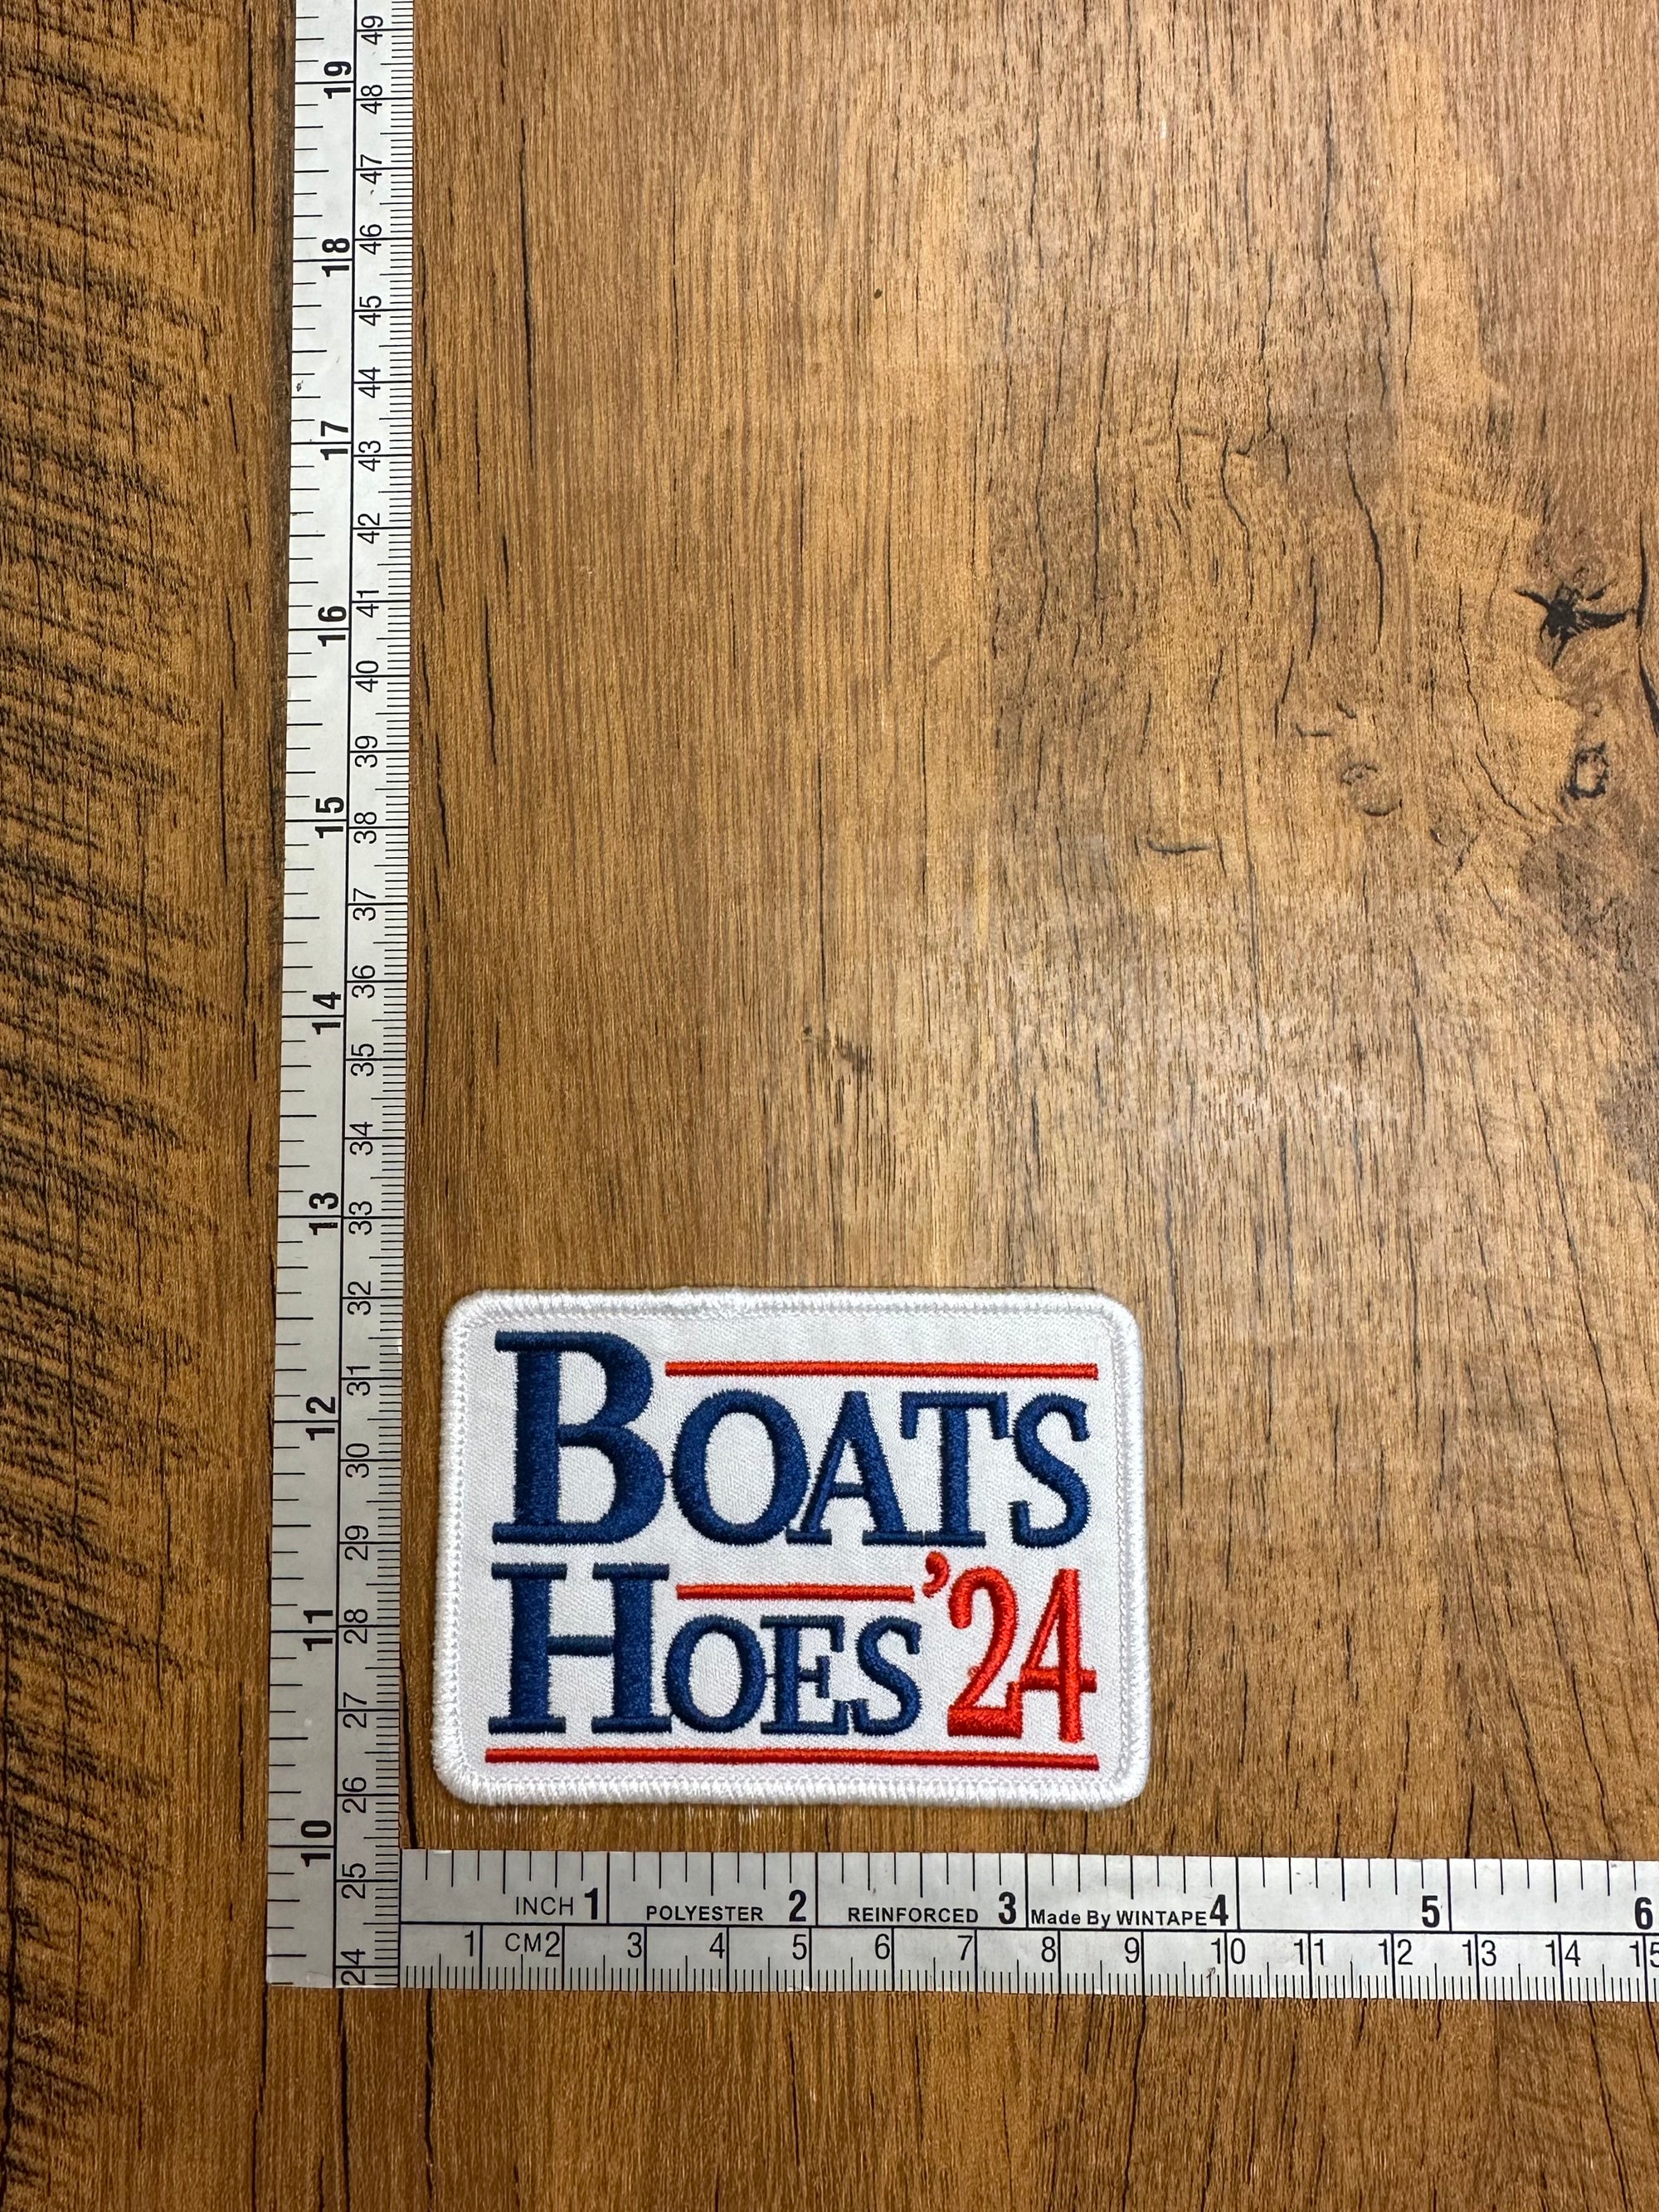 Boats Hoes '24